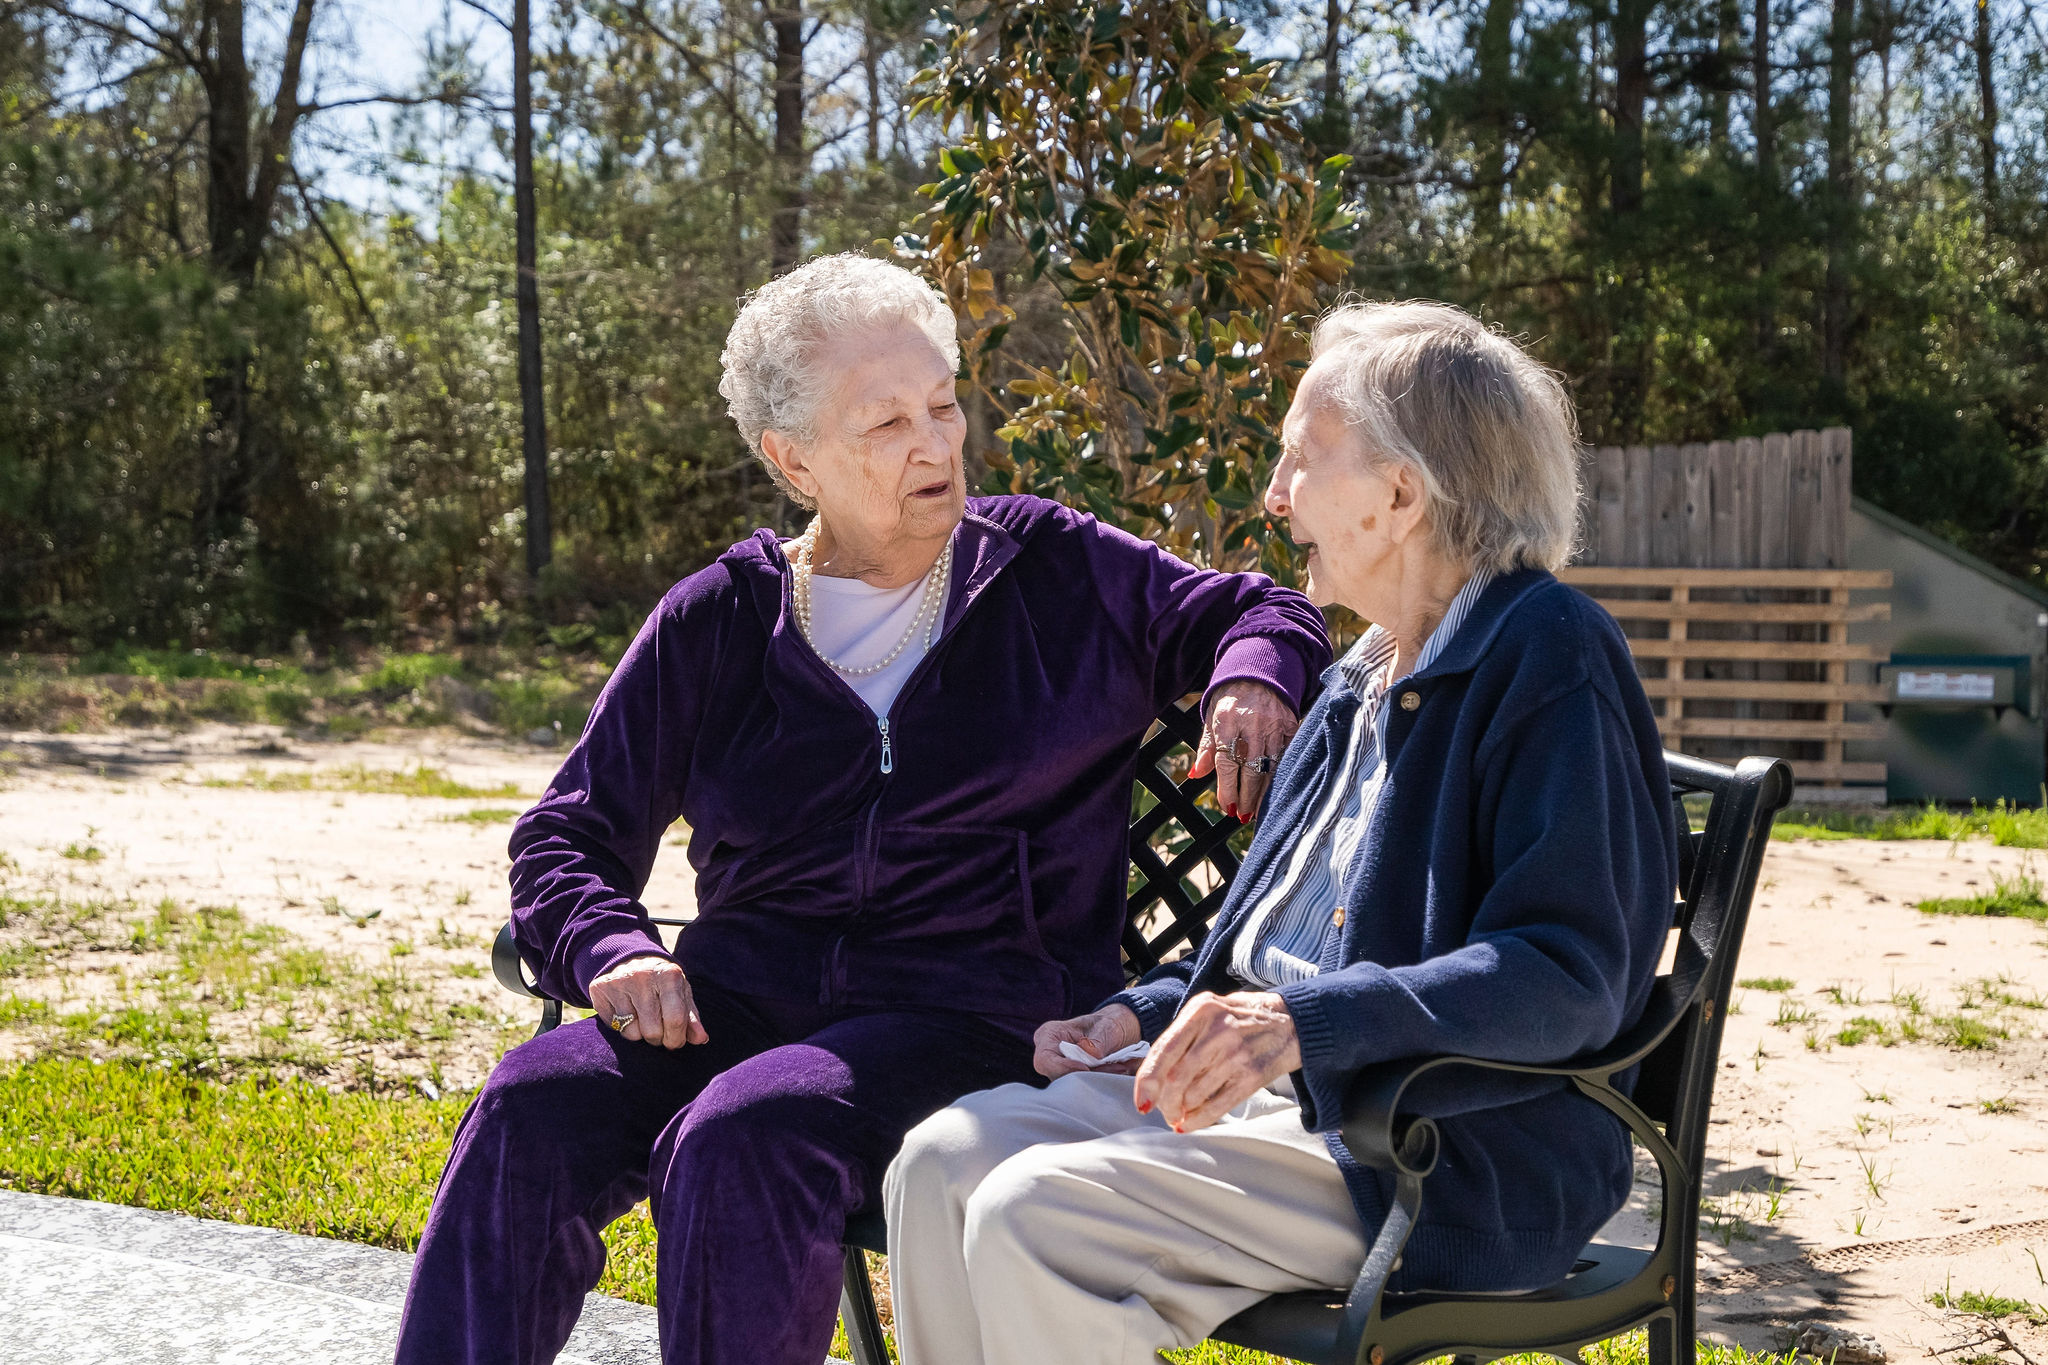 two older women laughing together on a bench